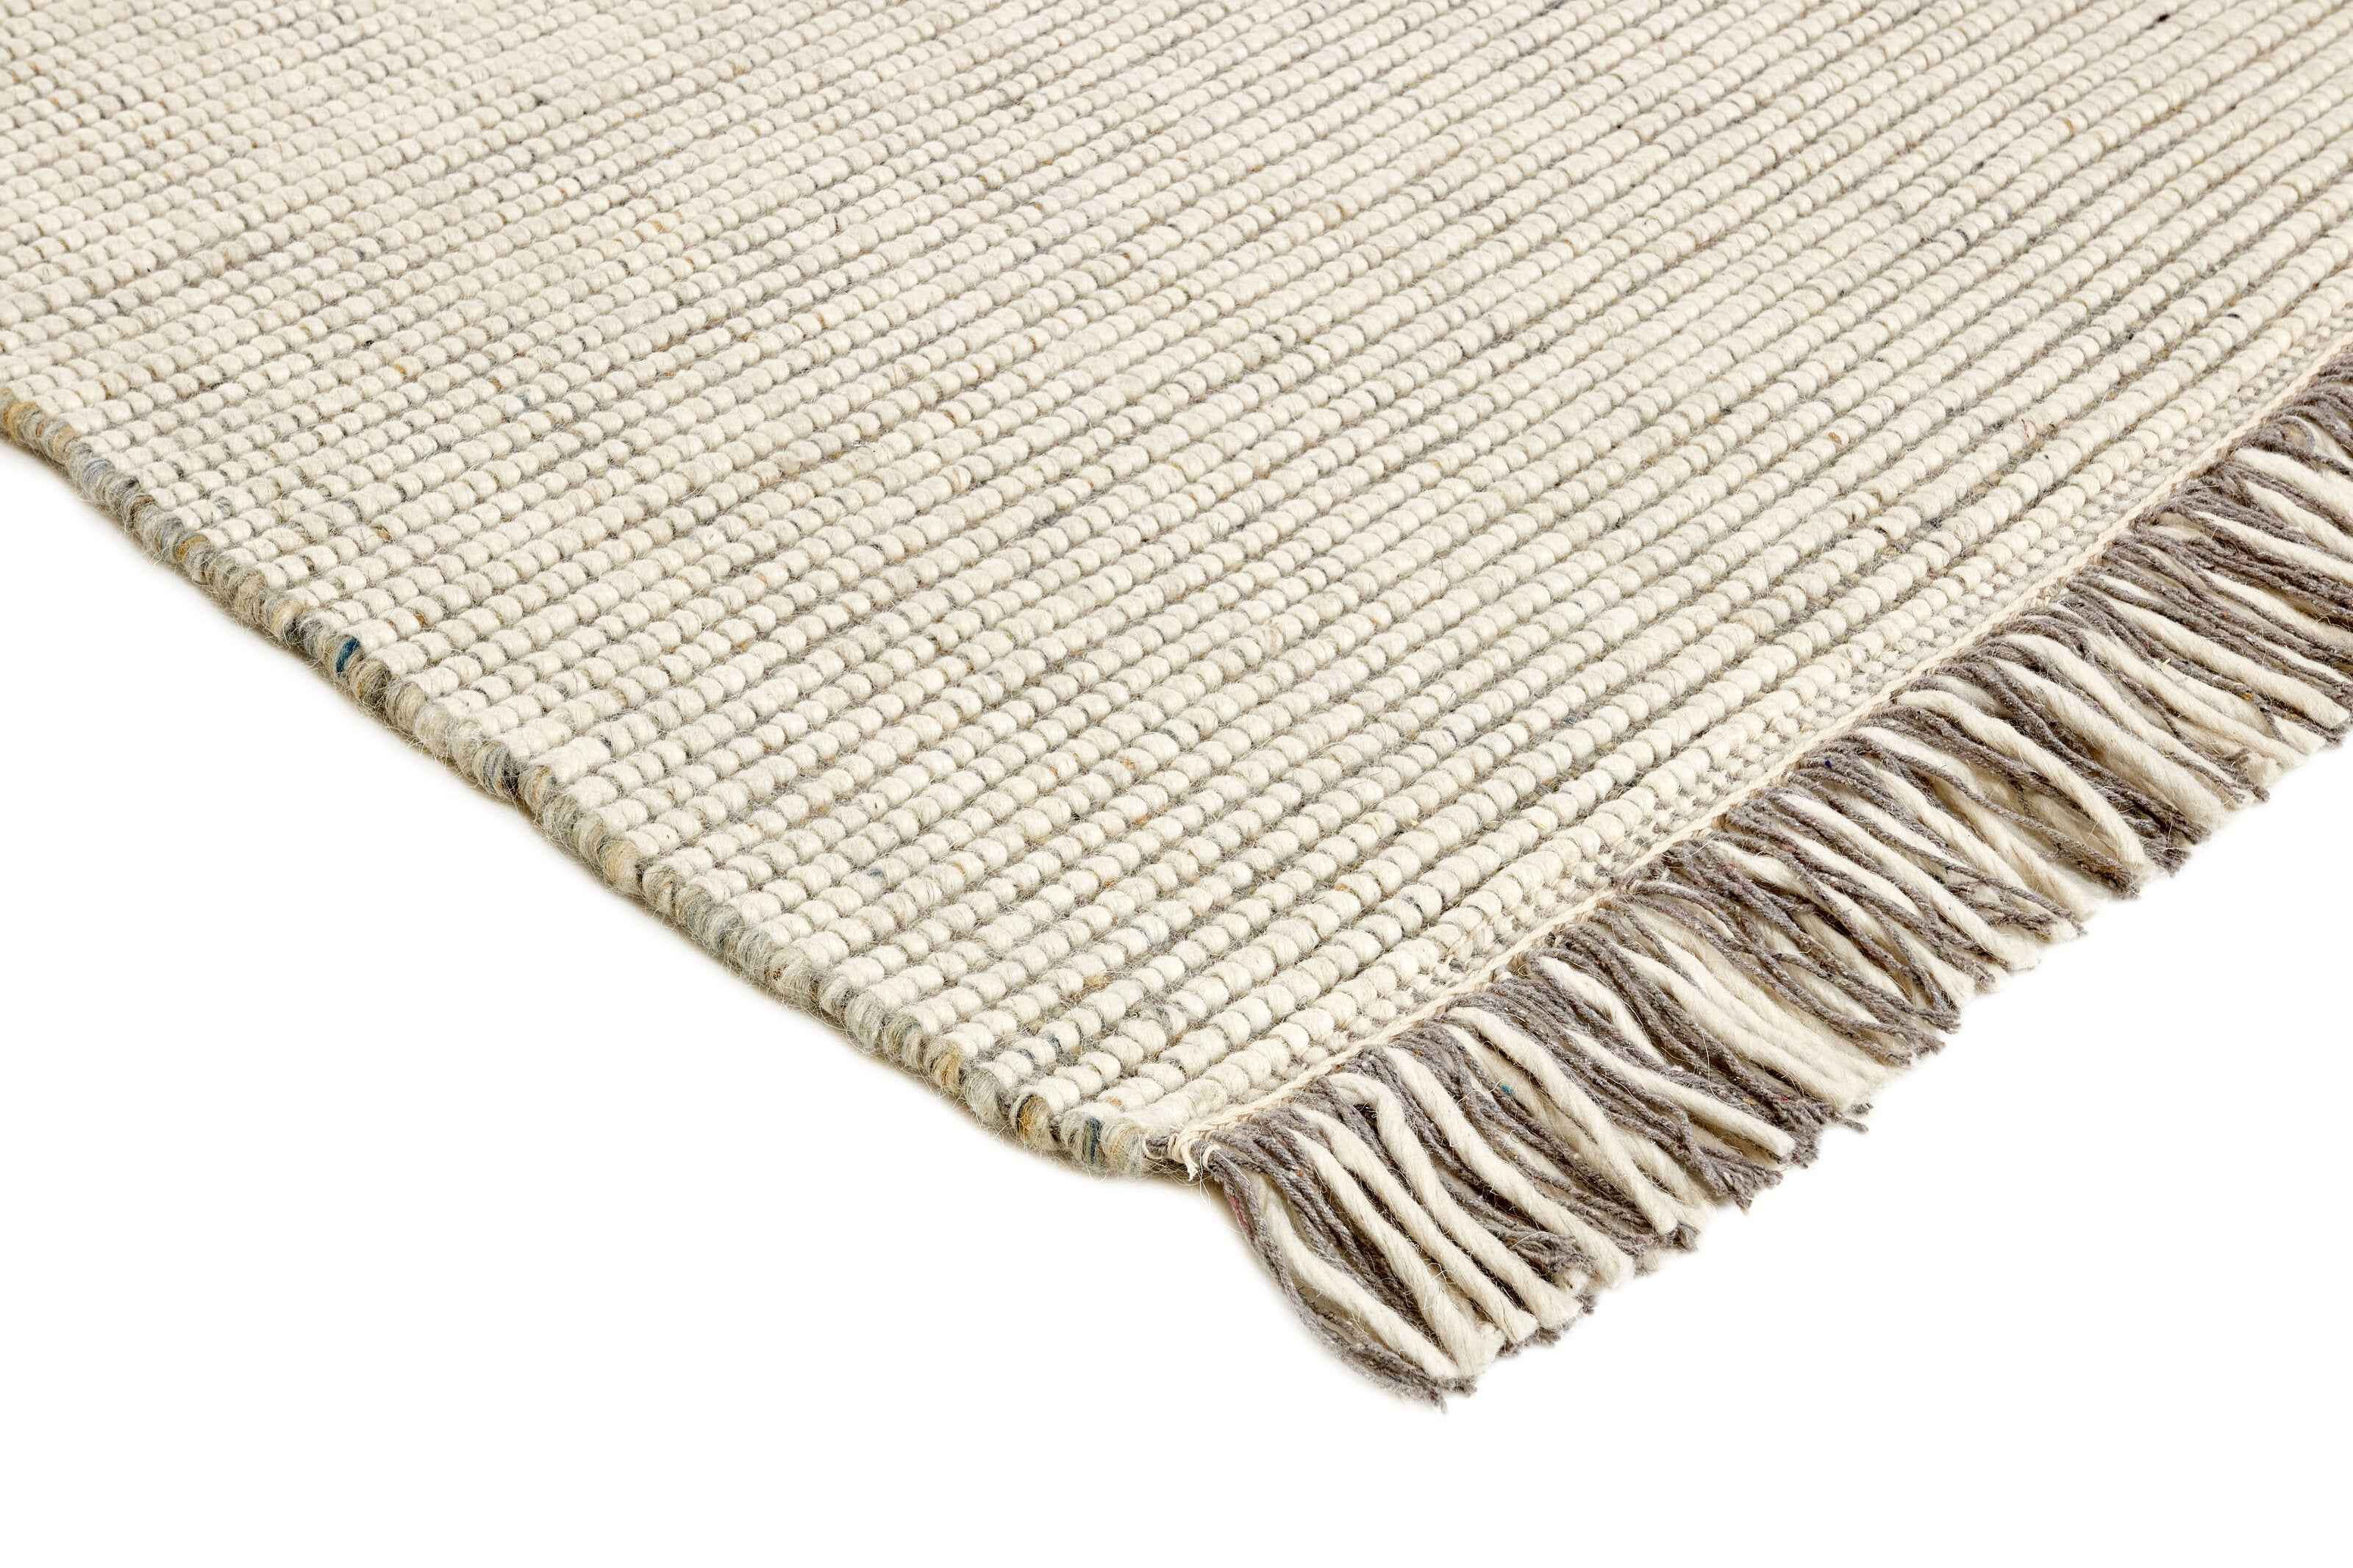 300x300 cm Indian Wool Multicolor Rug-5971A, Grey White - Rugmaster